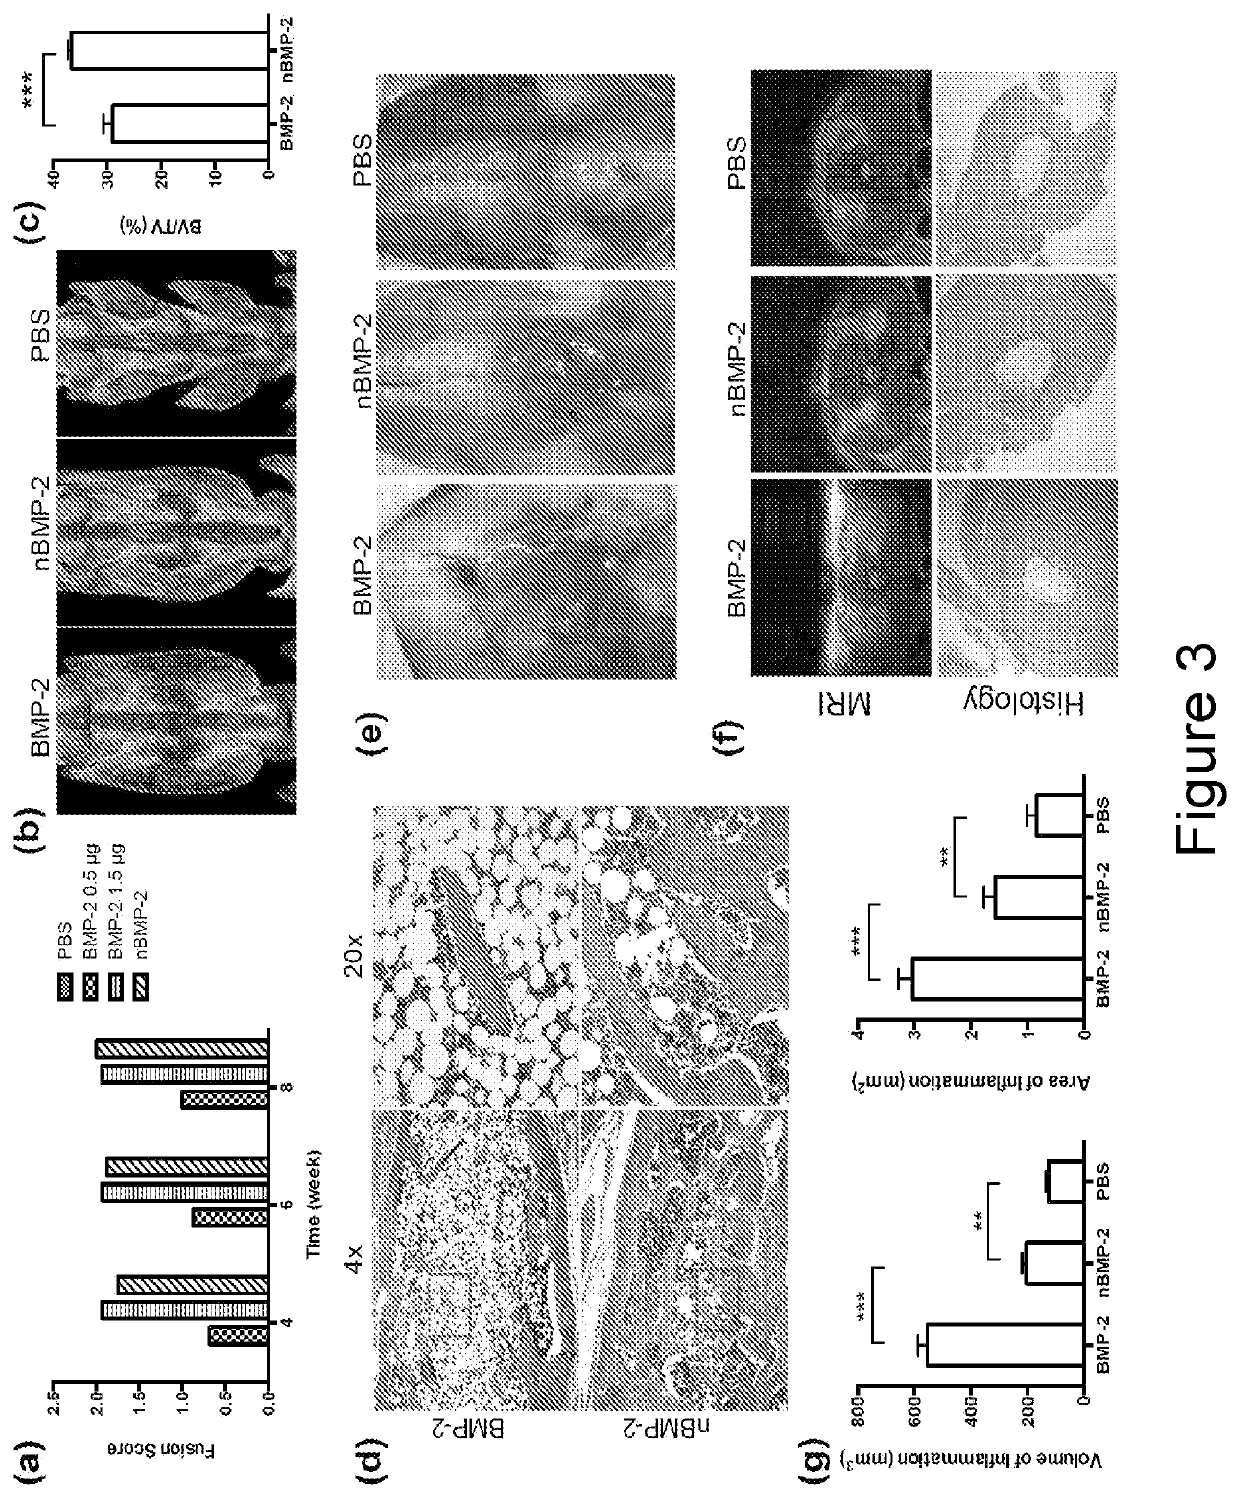 Growth-factor nanocapsules with tunable release capability for bone regeneration